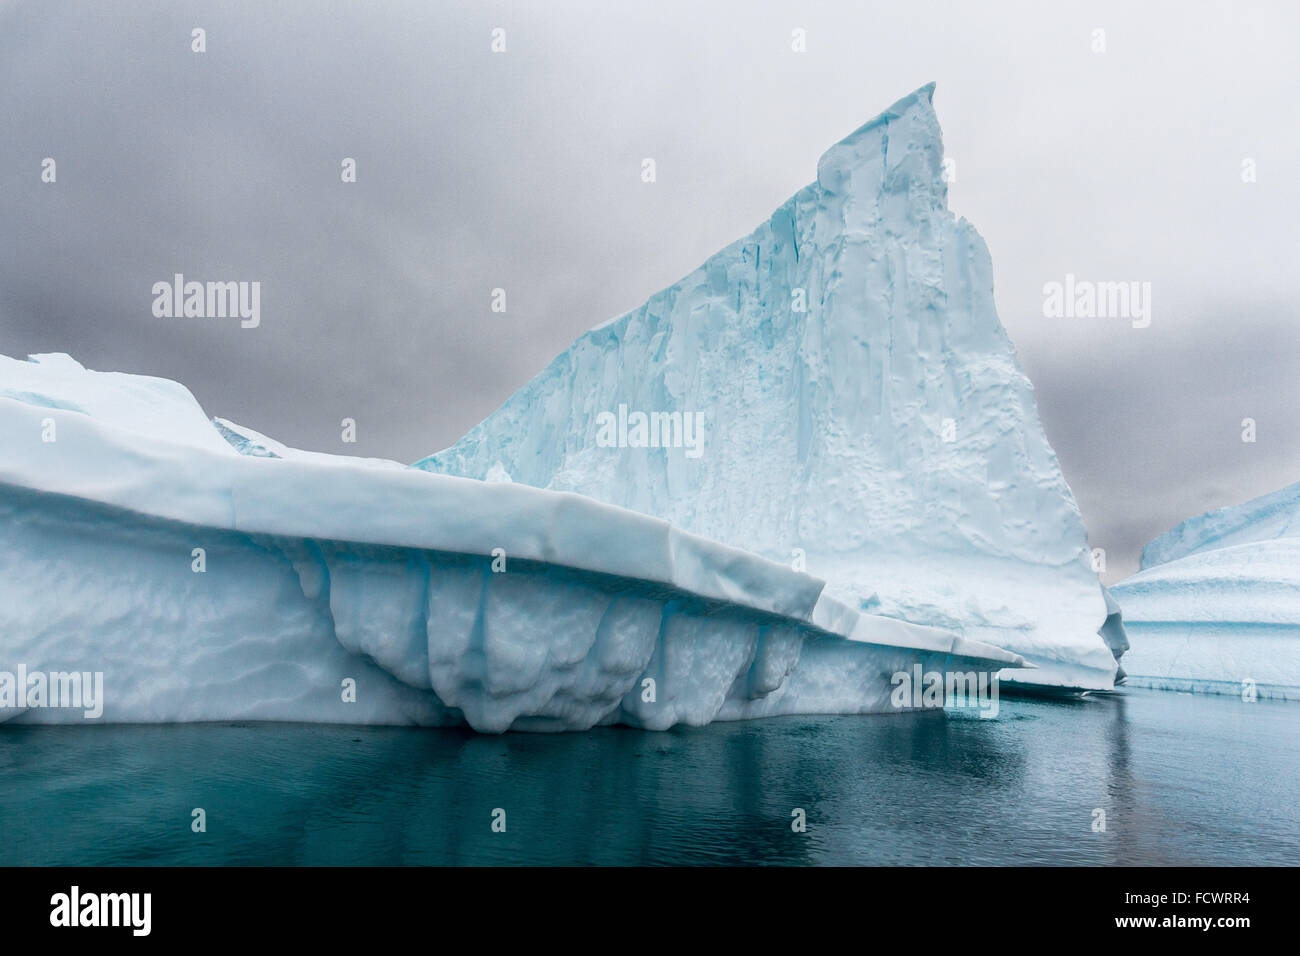 An iceberg in Scoresby Sound, Greenland Stock Photo